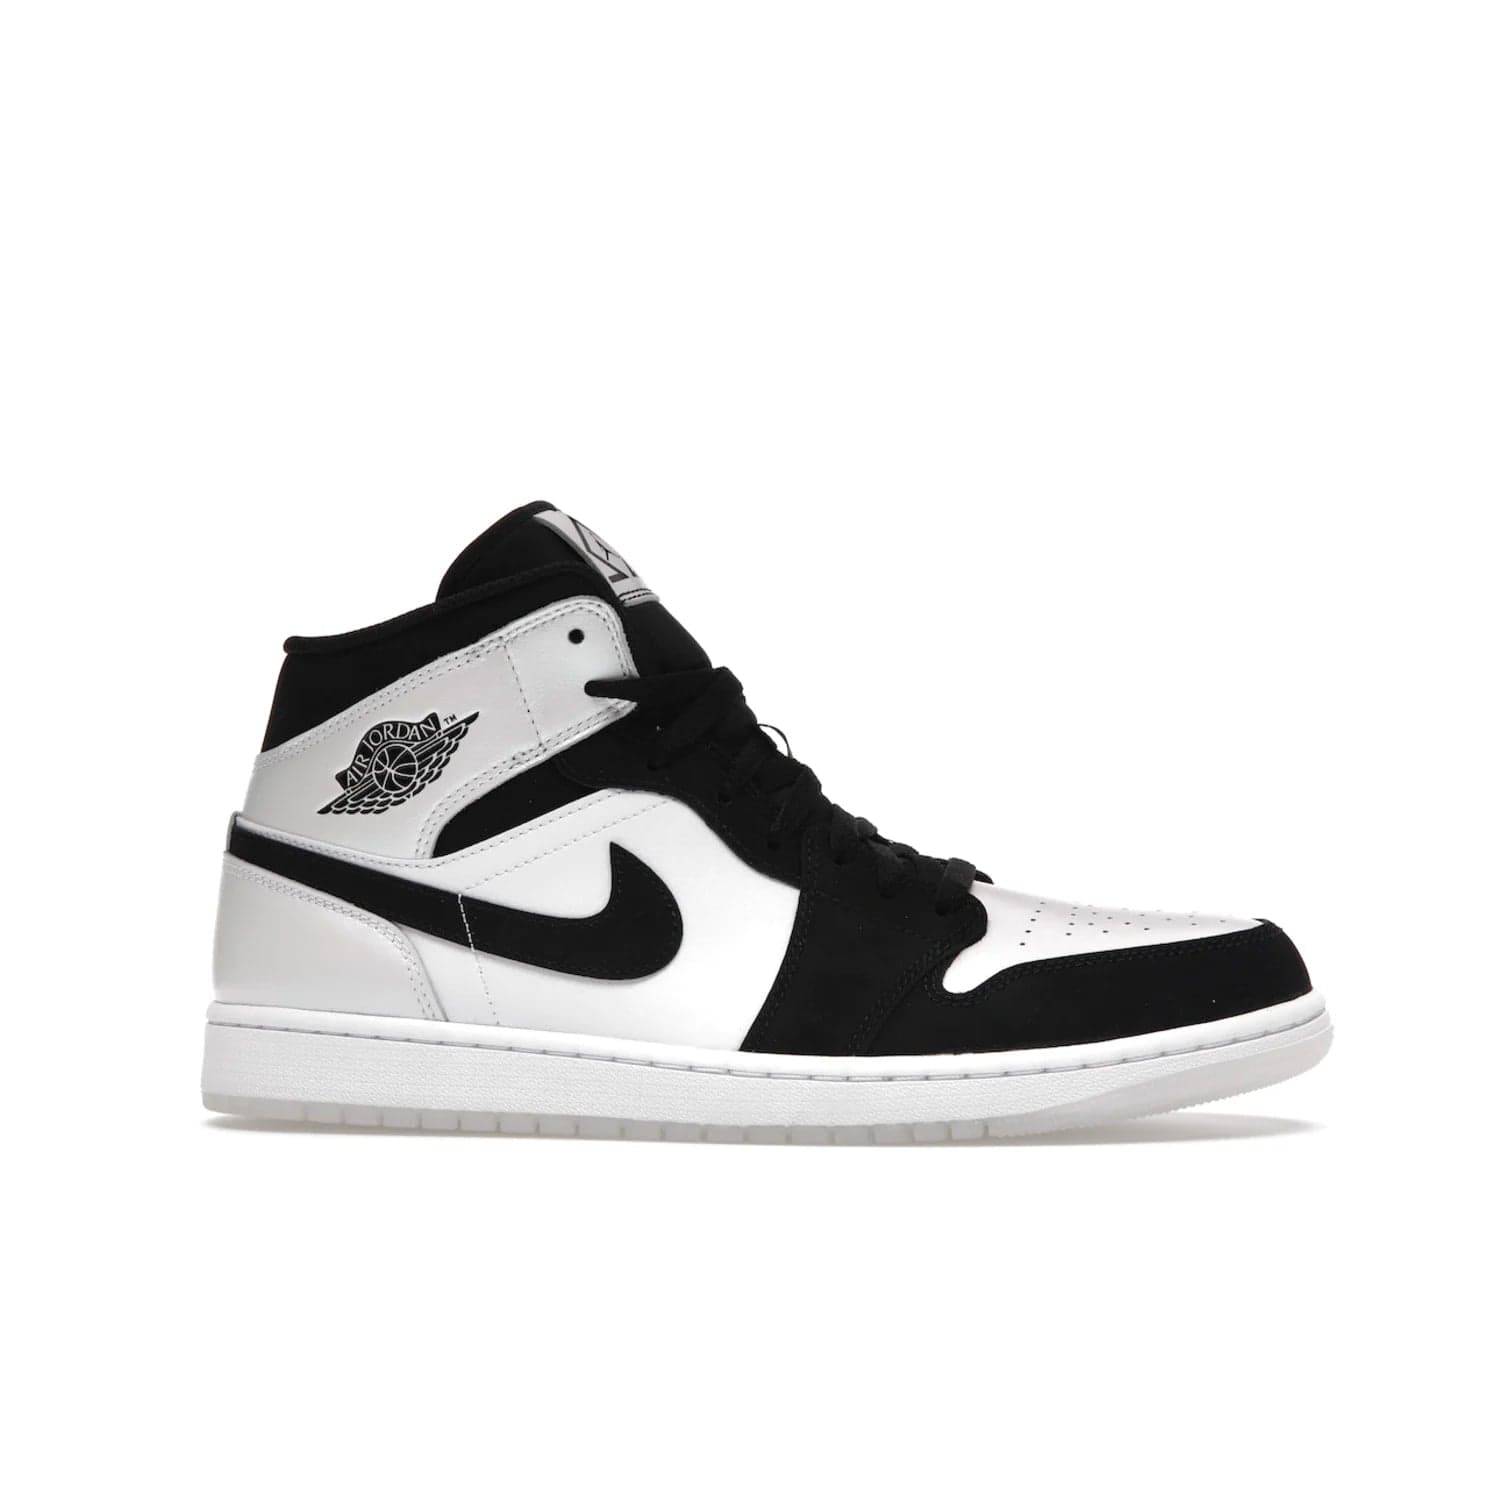 Jordan 1 Mid Diamond Shorts - Image 2 - Only at www.BallersClubKickz.com - Classic style for any occasion. Air Jordan 1 Mid Diamond shorts with white leather upper, black Durabuck overlays, Wings logo, Jumpman woven label and semi-translucent outsoles.